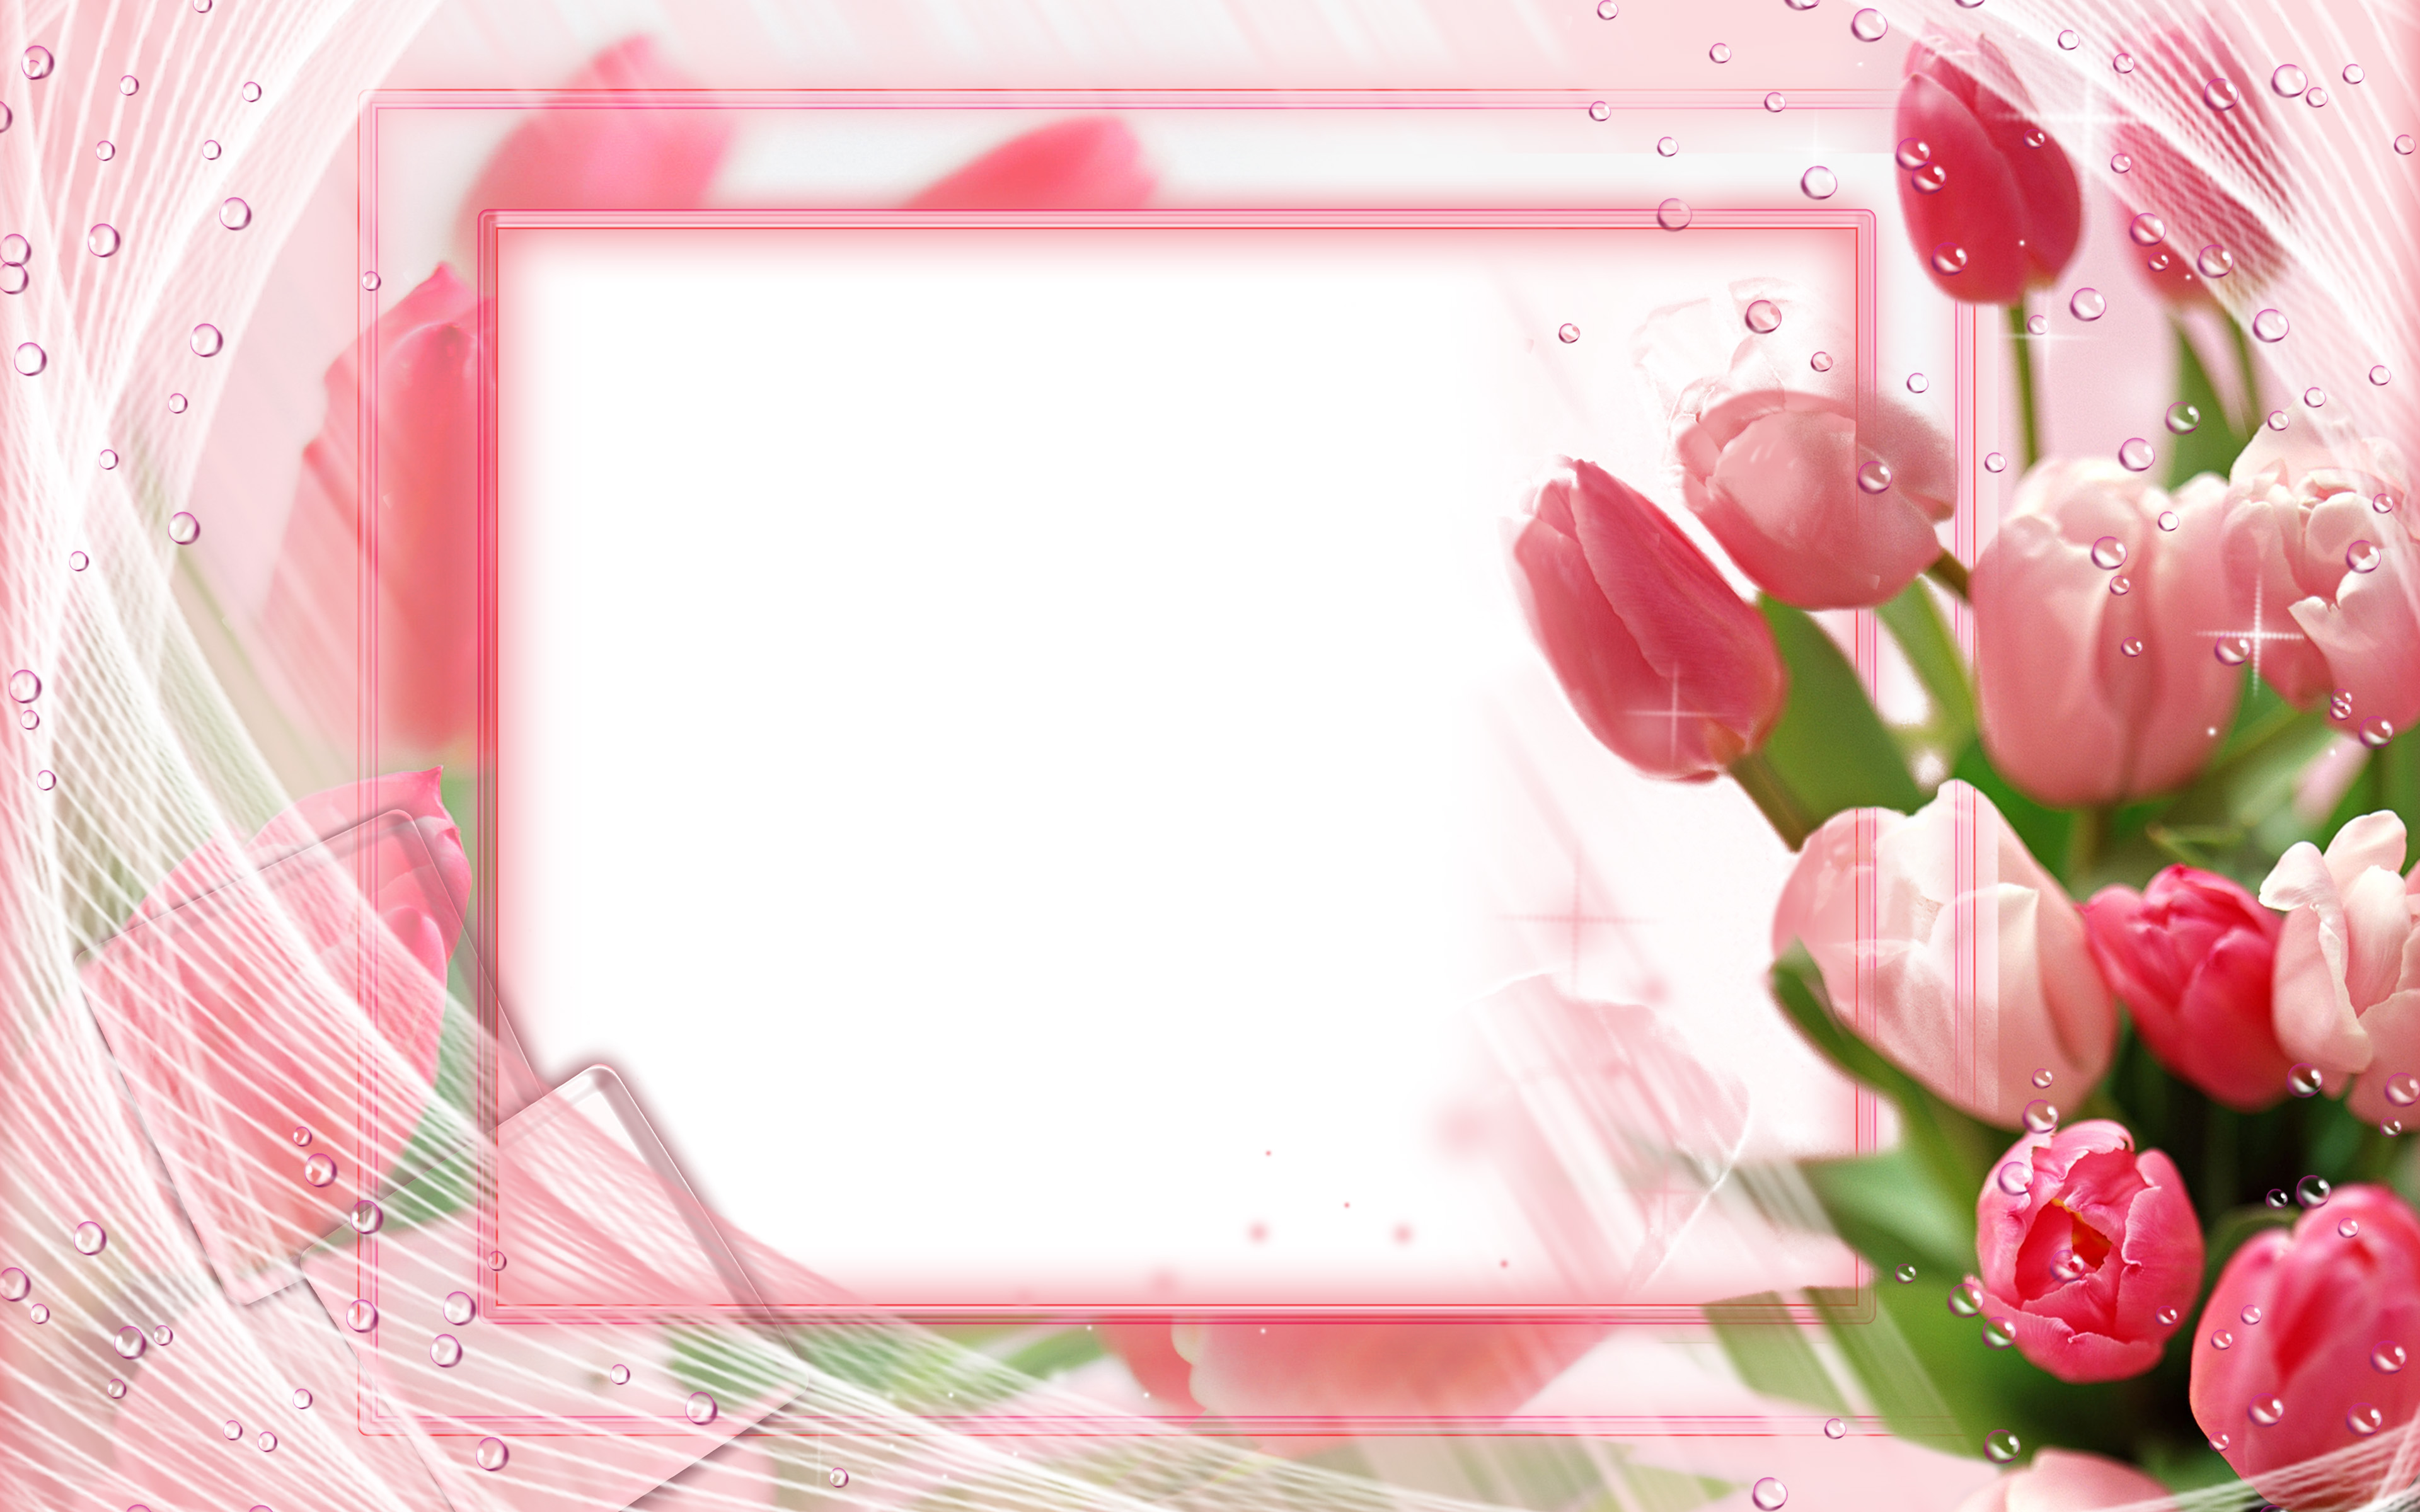 Download wallpaper pink tulips frame, 4k, floral concepts, floral frames, white background, pink flowers, pink floral frame for desktop with resolution 3840x2400. High Quality HD picture wallpaper